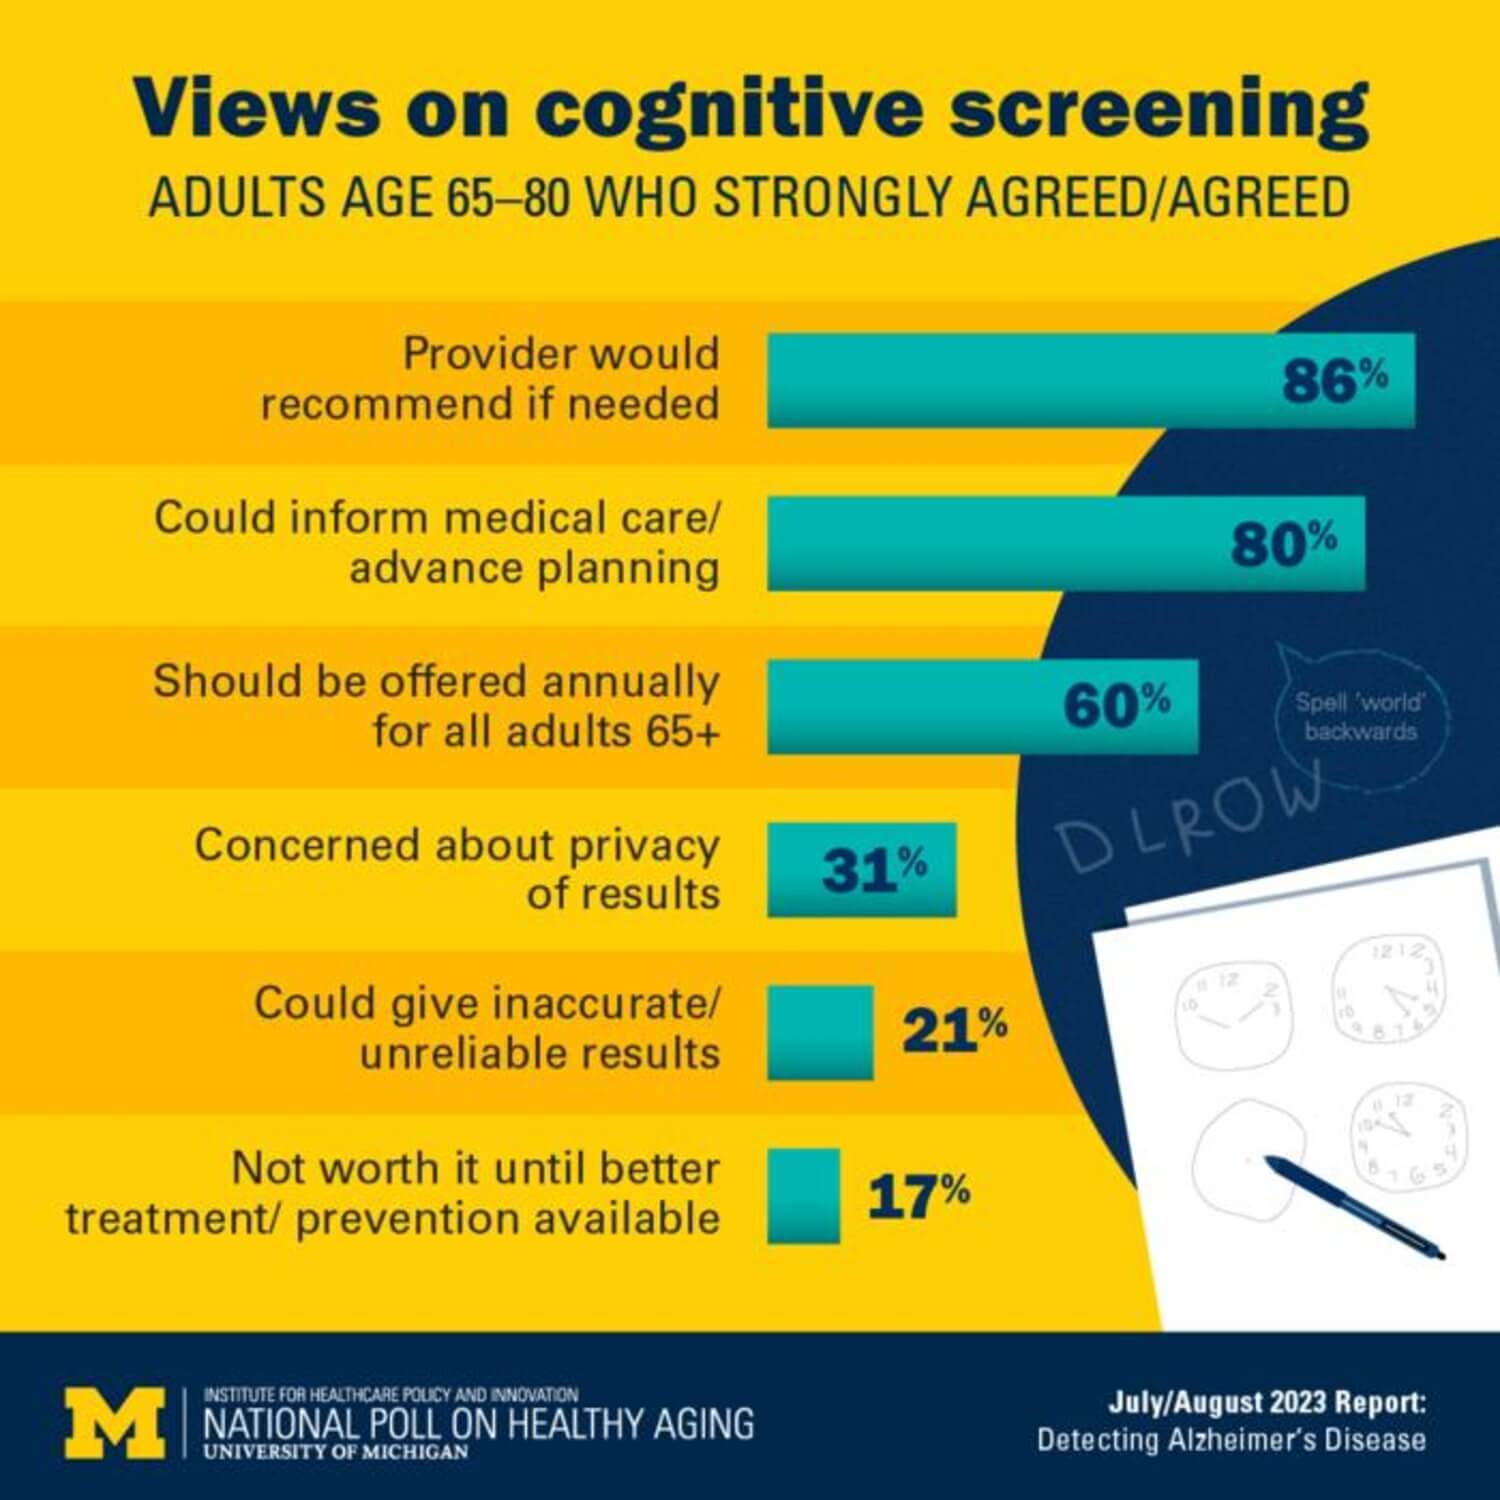 Views of adults age 65 to 80 toward cognitive screening, as measured by the National Poll on Healthy Aging